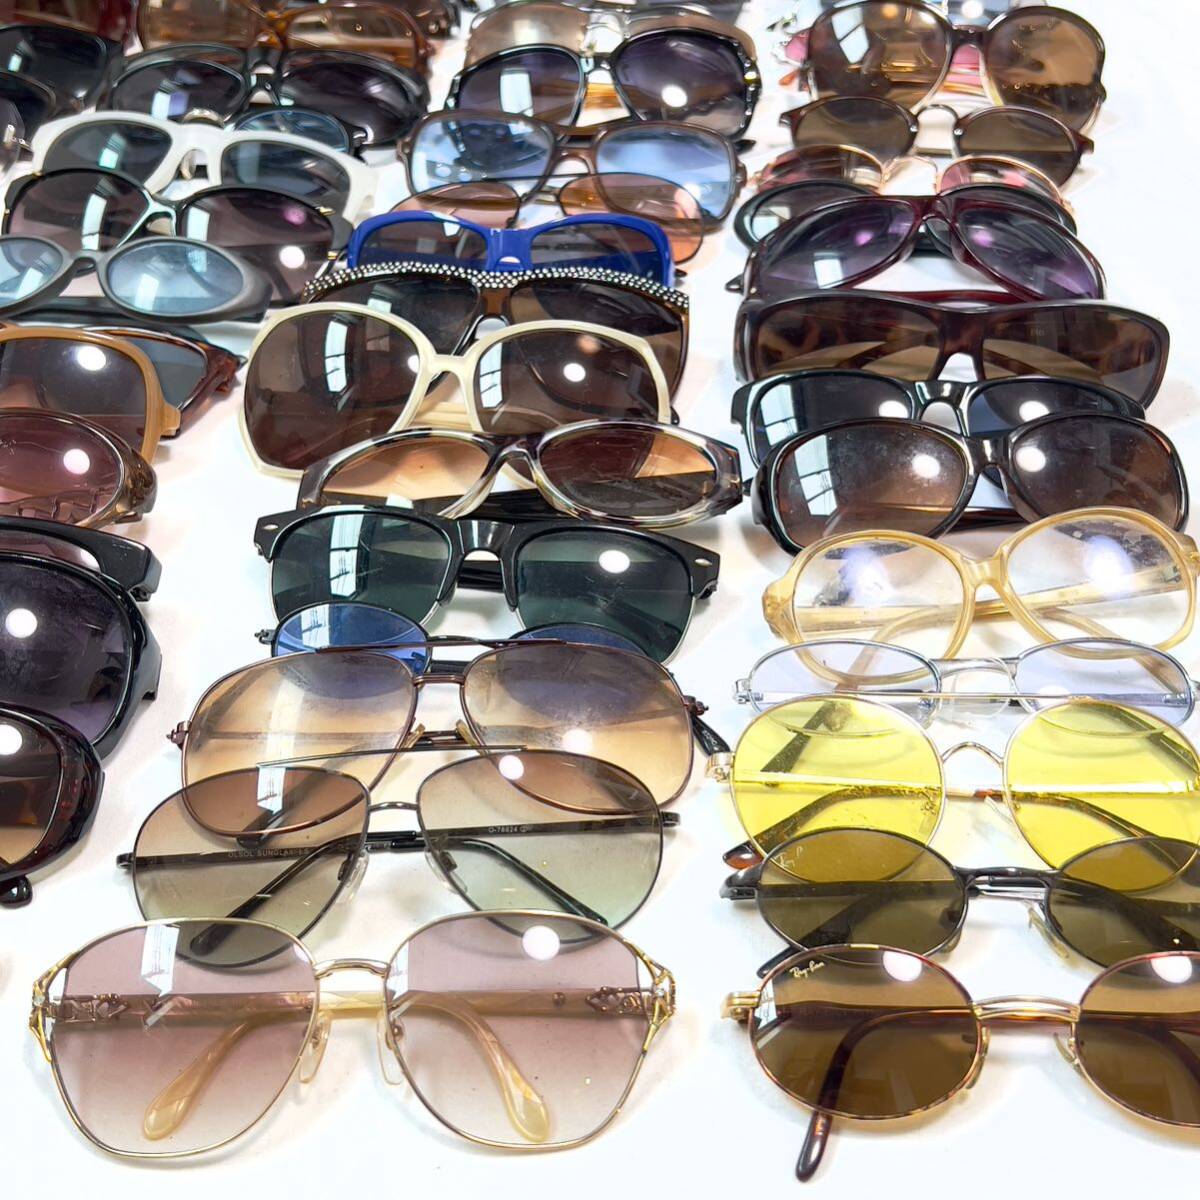  Junk sunglasses 100 point and more set sale RayBan Gianni Versace etc. together large amount set sunglasses men's lady's 